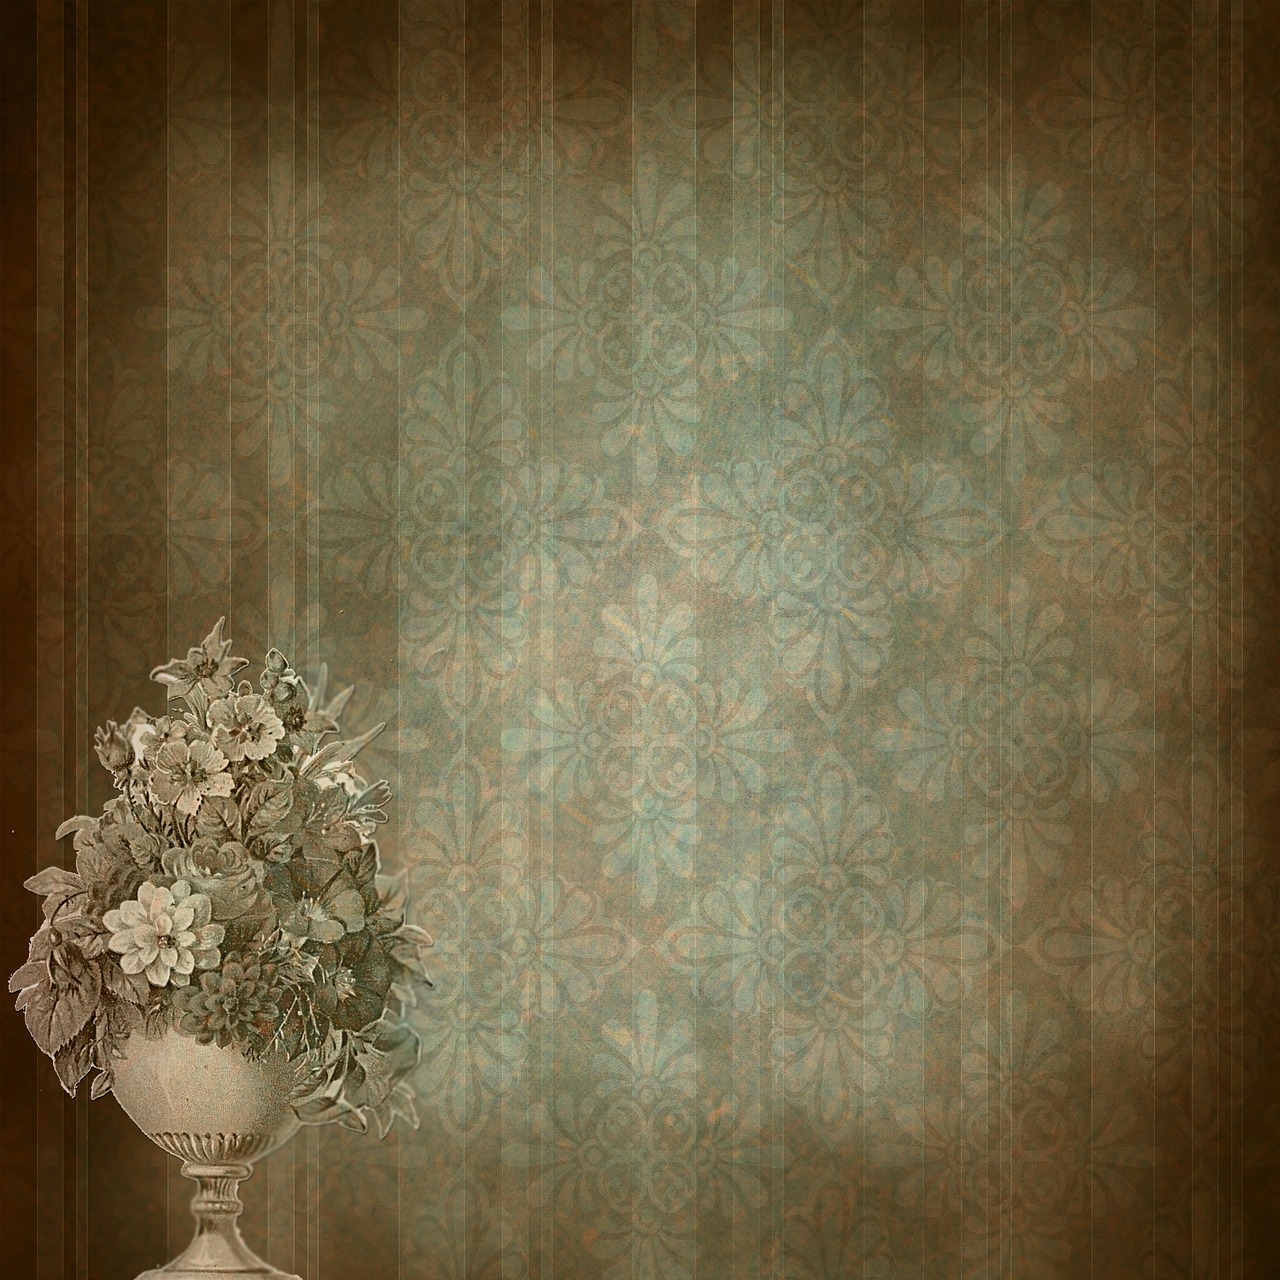 background scrapbooking paper free photo